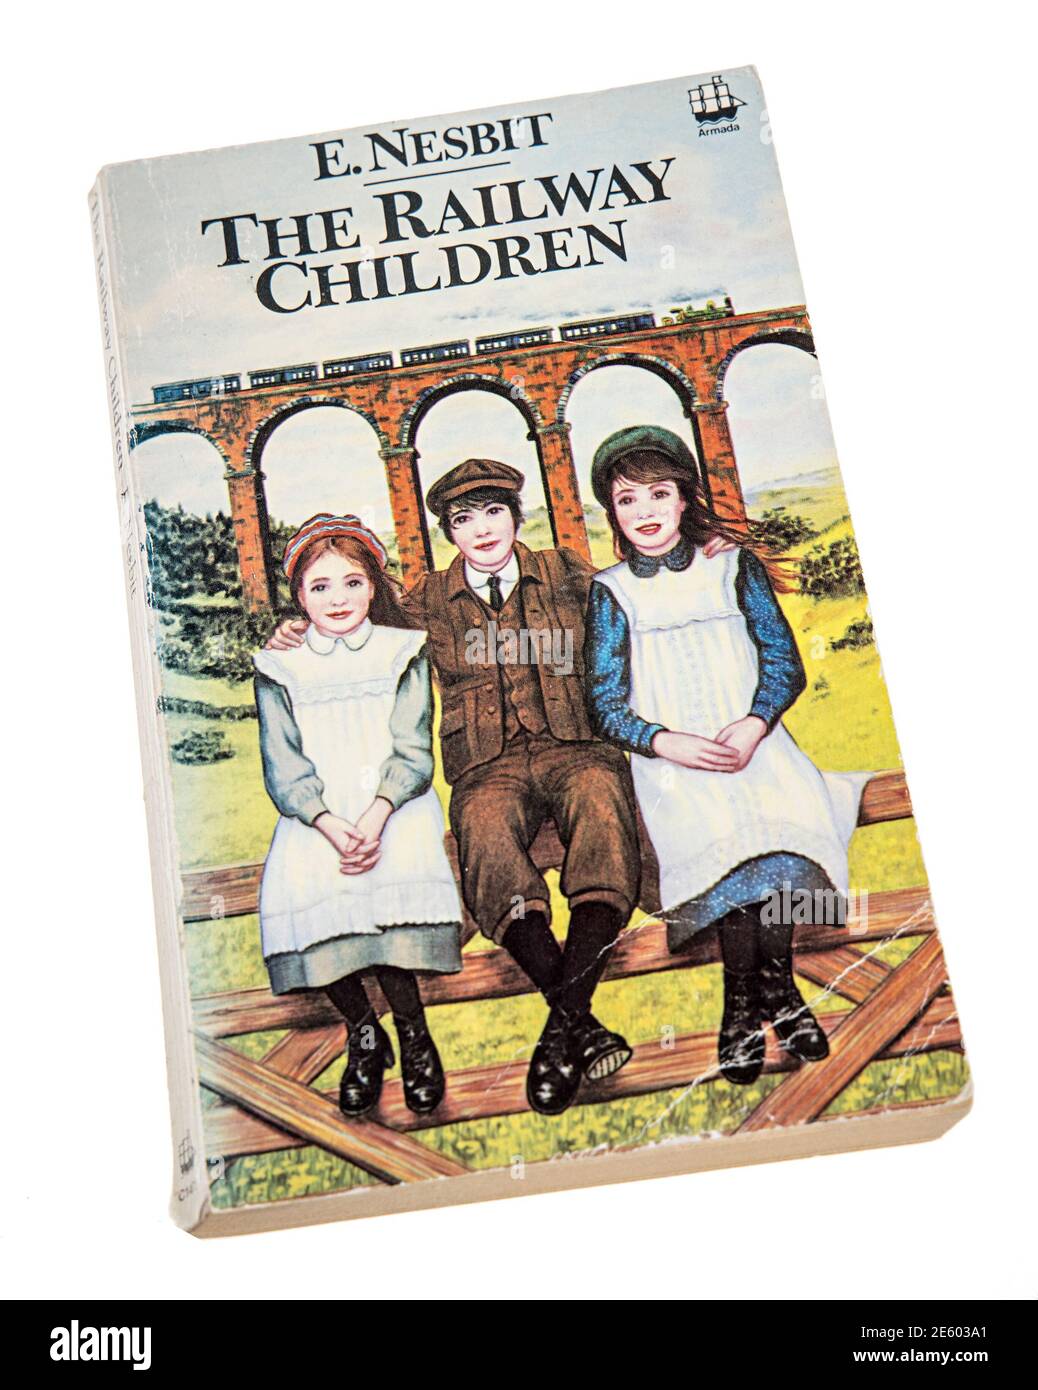 The Railway Children paperback book by E. Nesbit published by Armada in 1981 first published 1906 Stock Photo